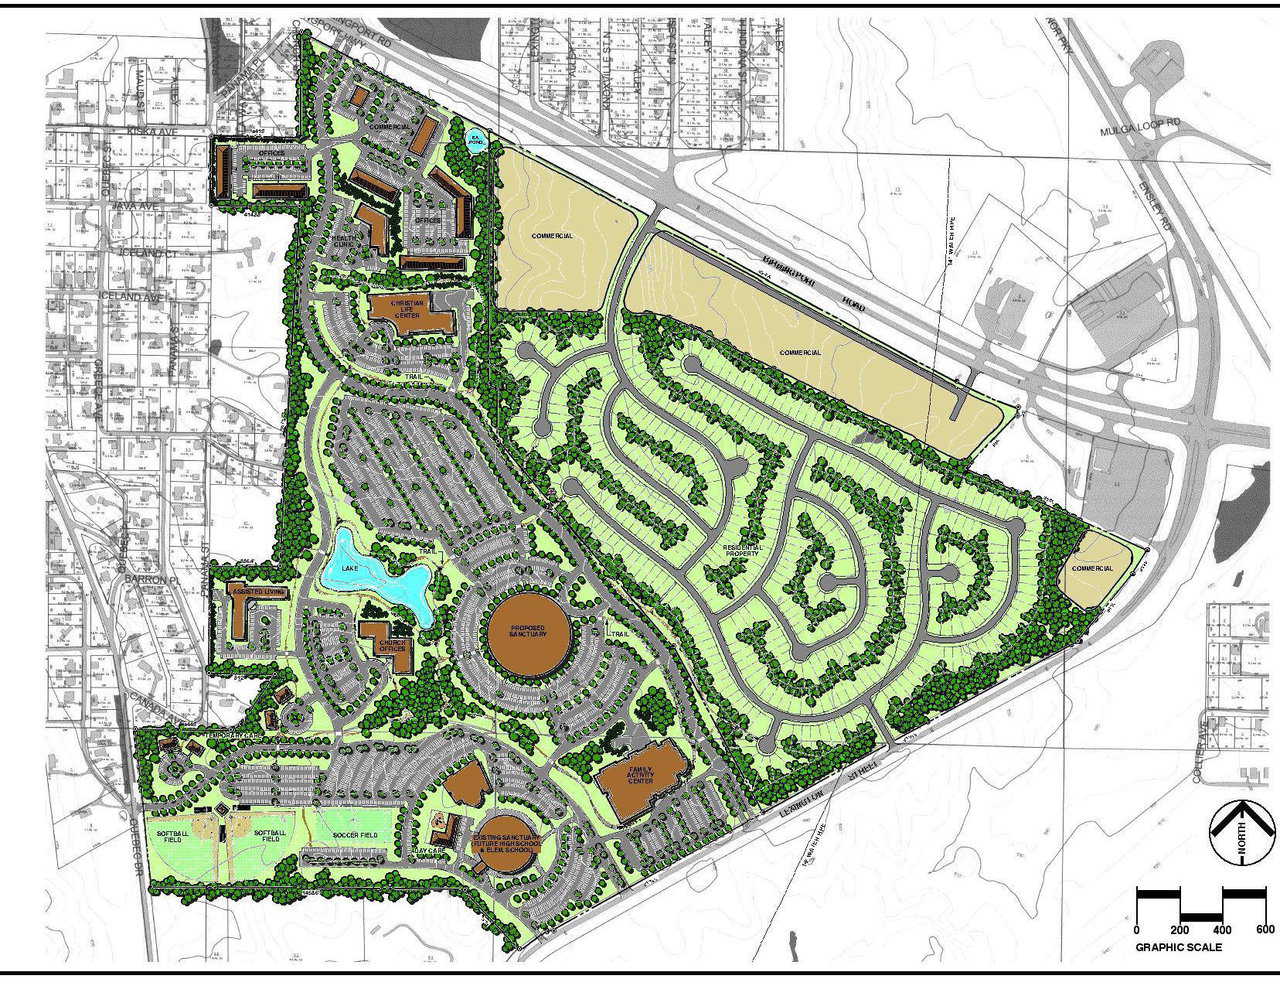 Plans — They included FCCC expansion.